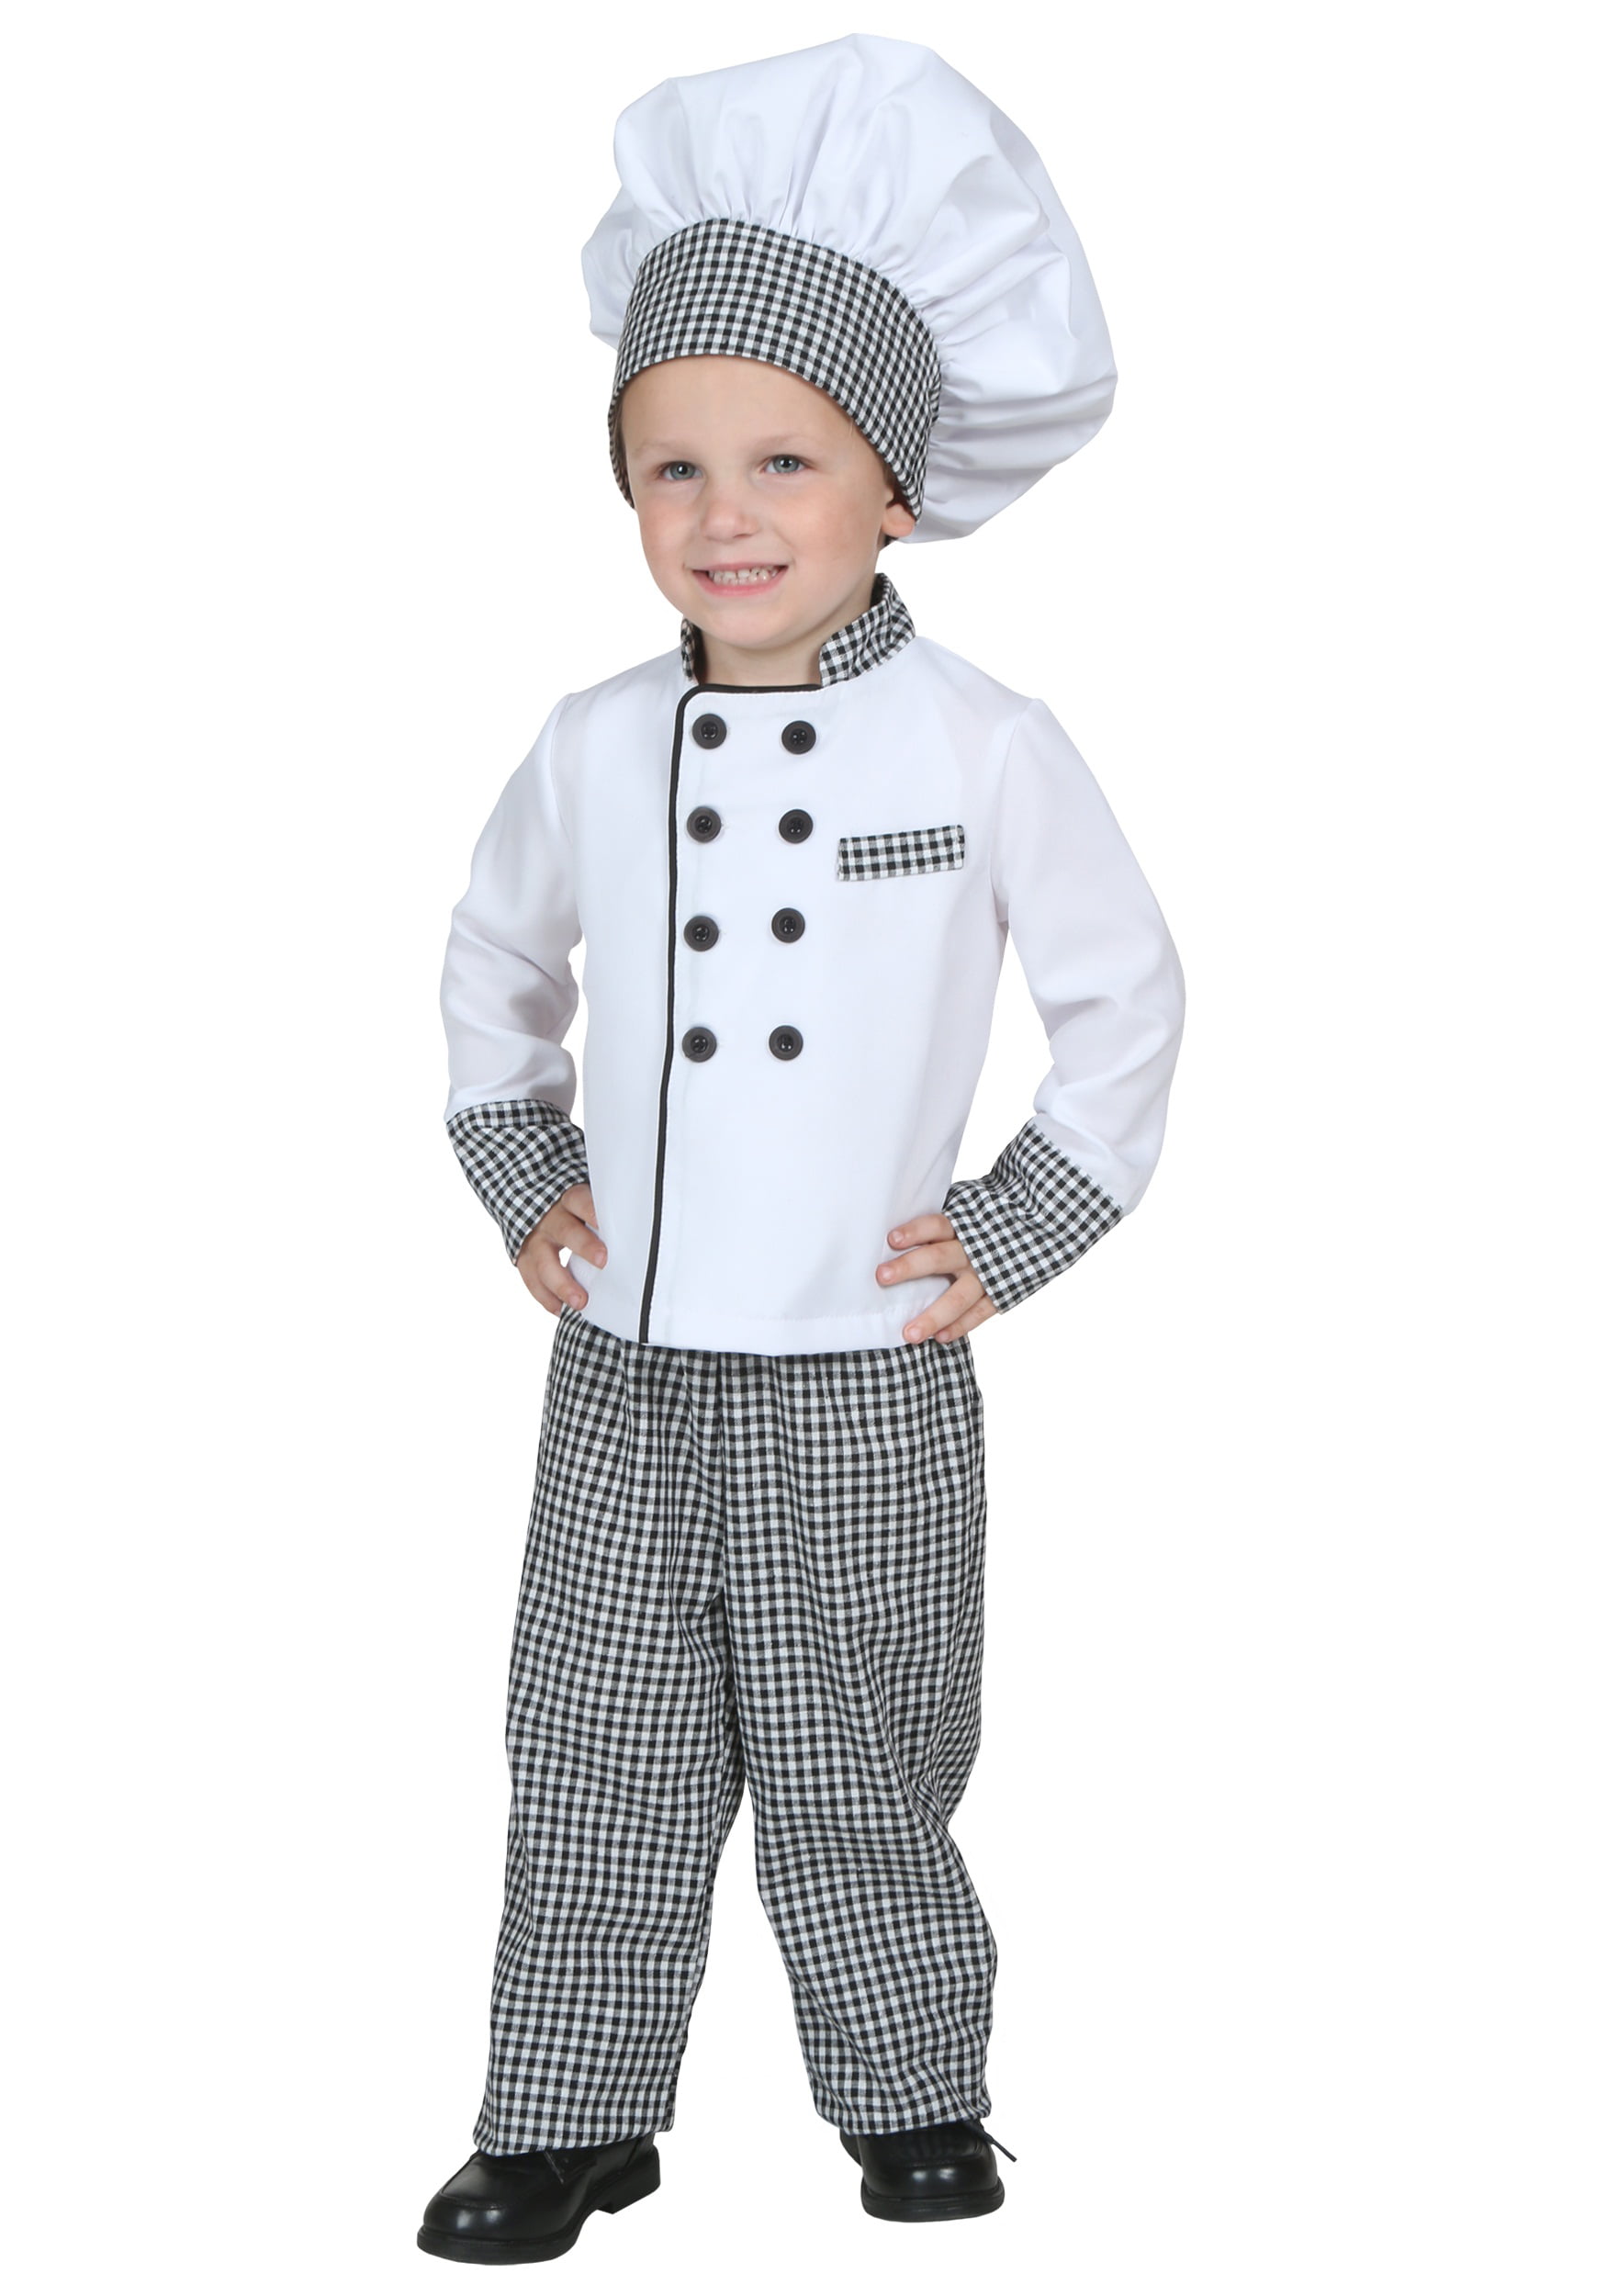 Chef Apron Kitchen Cook Food Cookout BBQ Fancy Dress Up Halloween Child Costume 